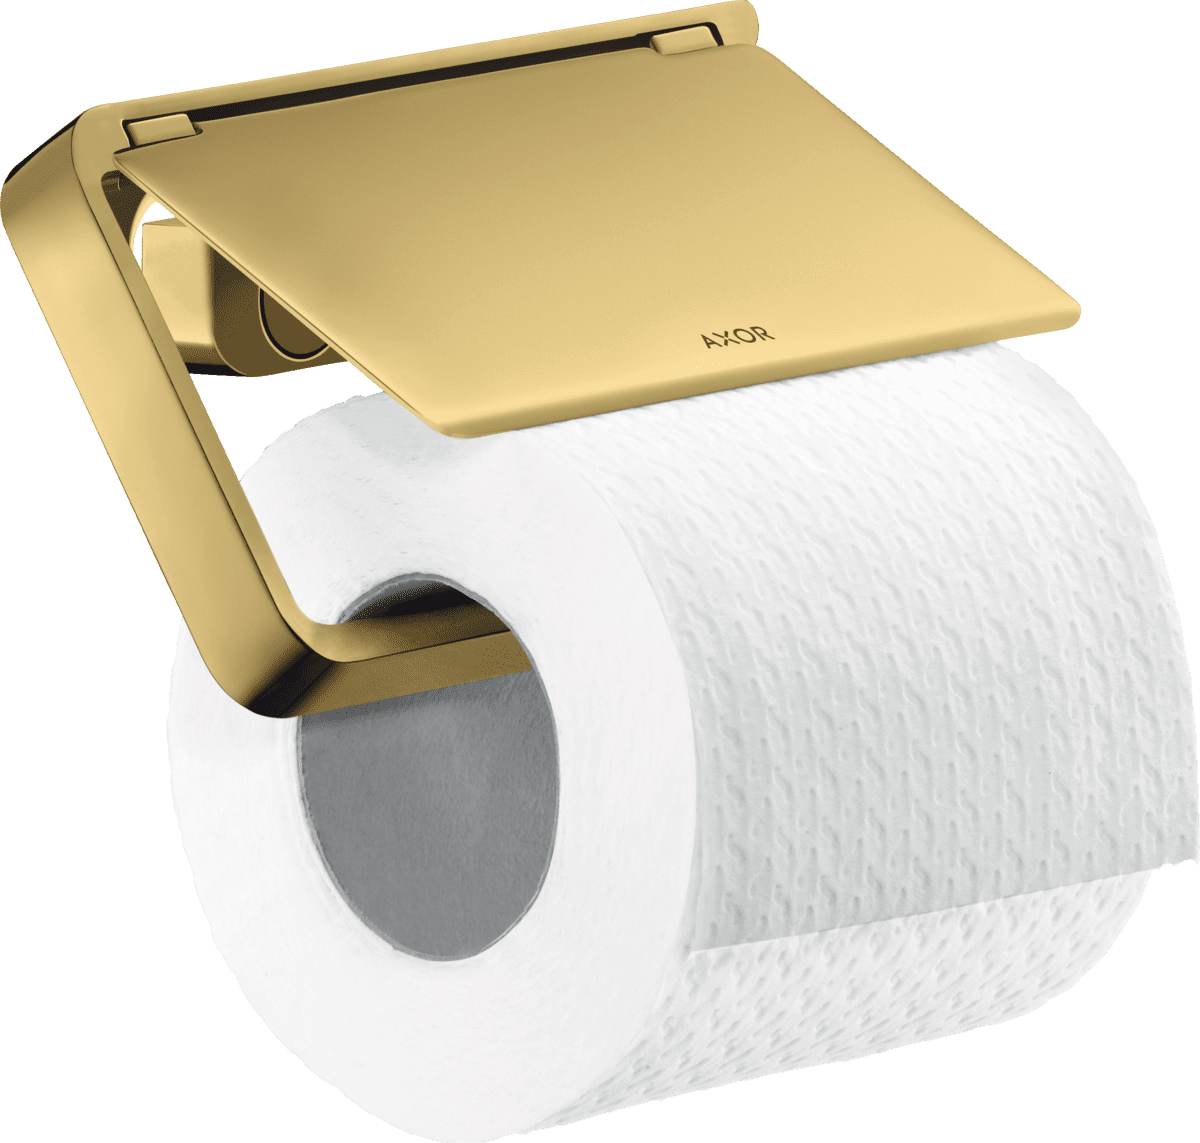 Picture of HANSGROHE AXOR Universal Softsquare Toilet paper holder with cover #42836990 - Polished Gold Optic